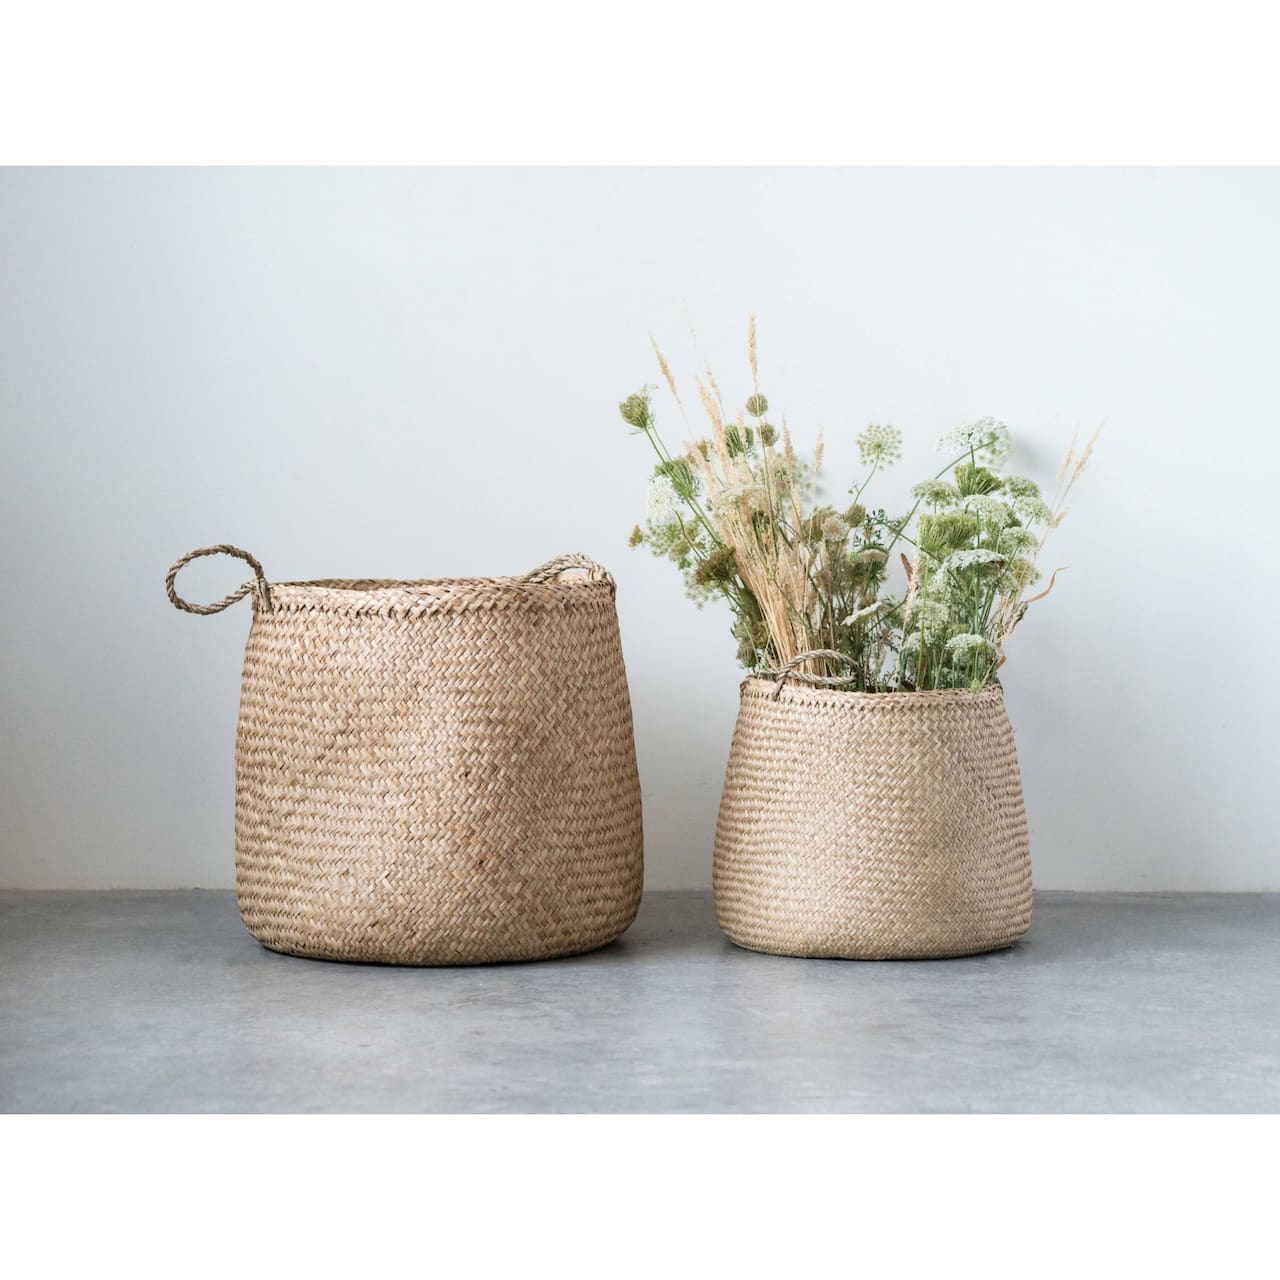 Beige Woven Seagrass Basket with Handles, 2ct.